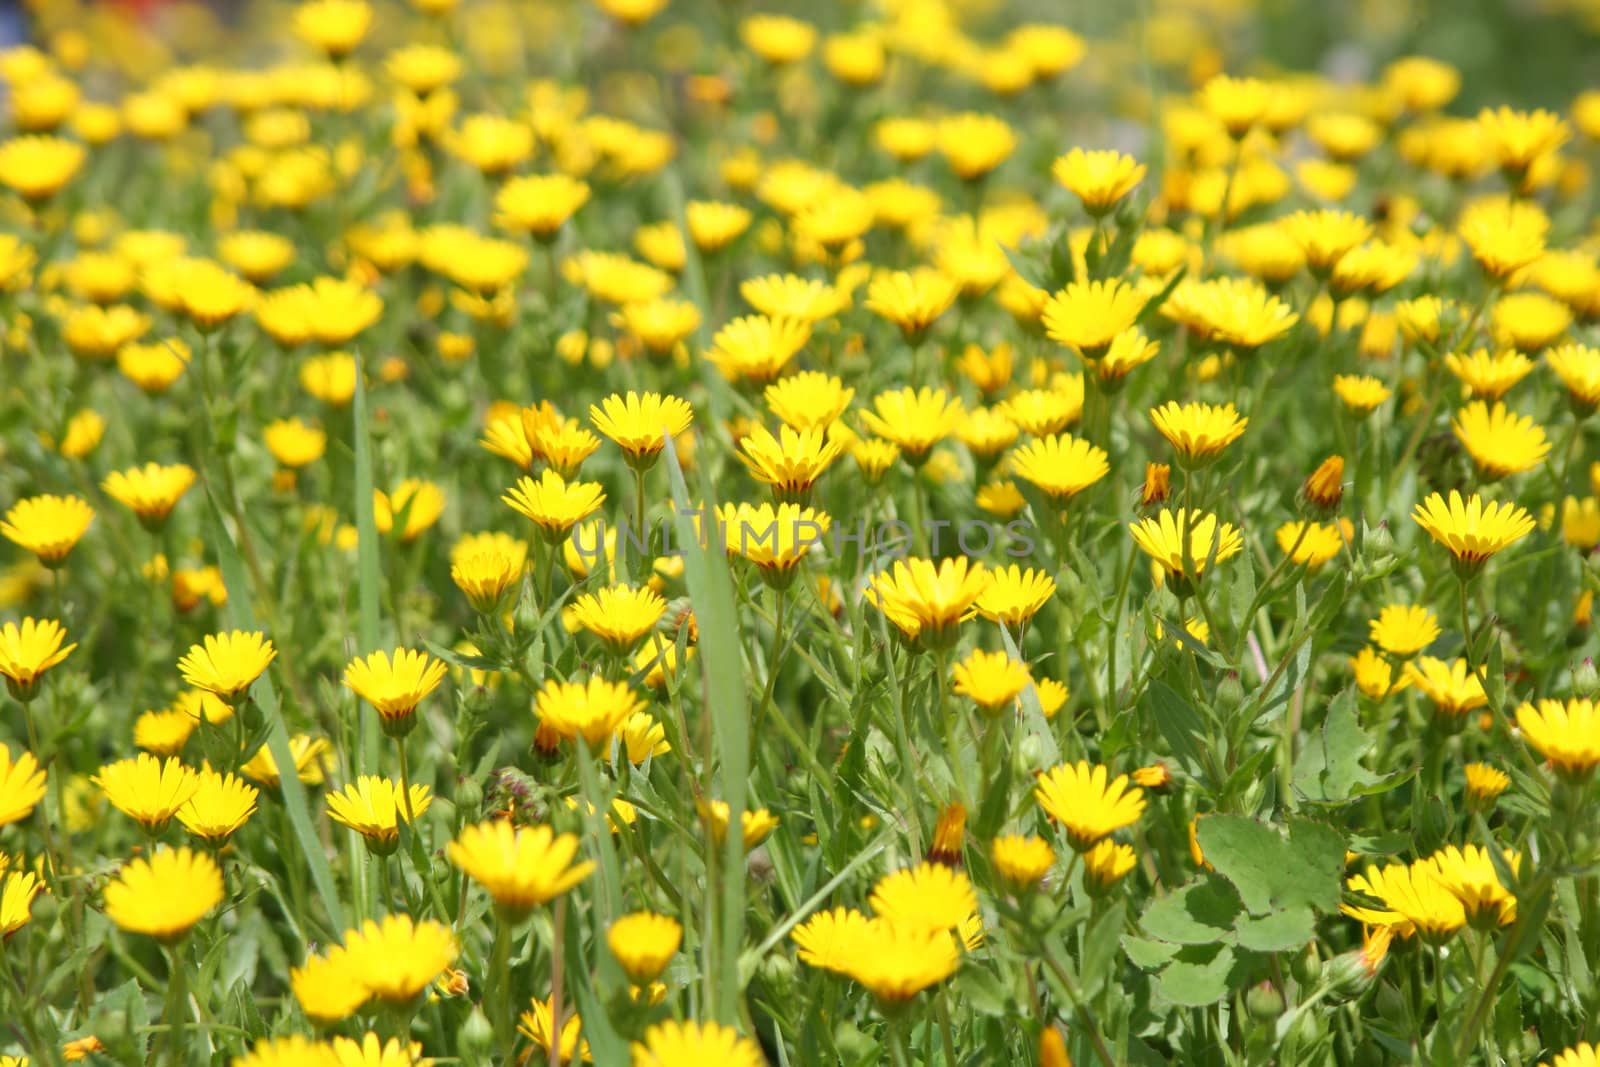 yellow flowers, Wildflower, Wild springtime season,meadow, plant park, Outdoor, Nature, lush, leaf, meadow, blossom, blooming, growing, green, grass, garden fresh flowers, flowerbed, flower, floral, wildflower, grass, environment, colorful,